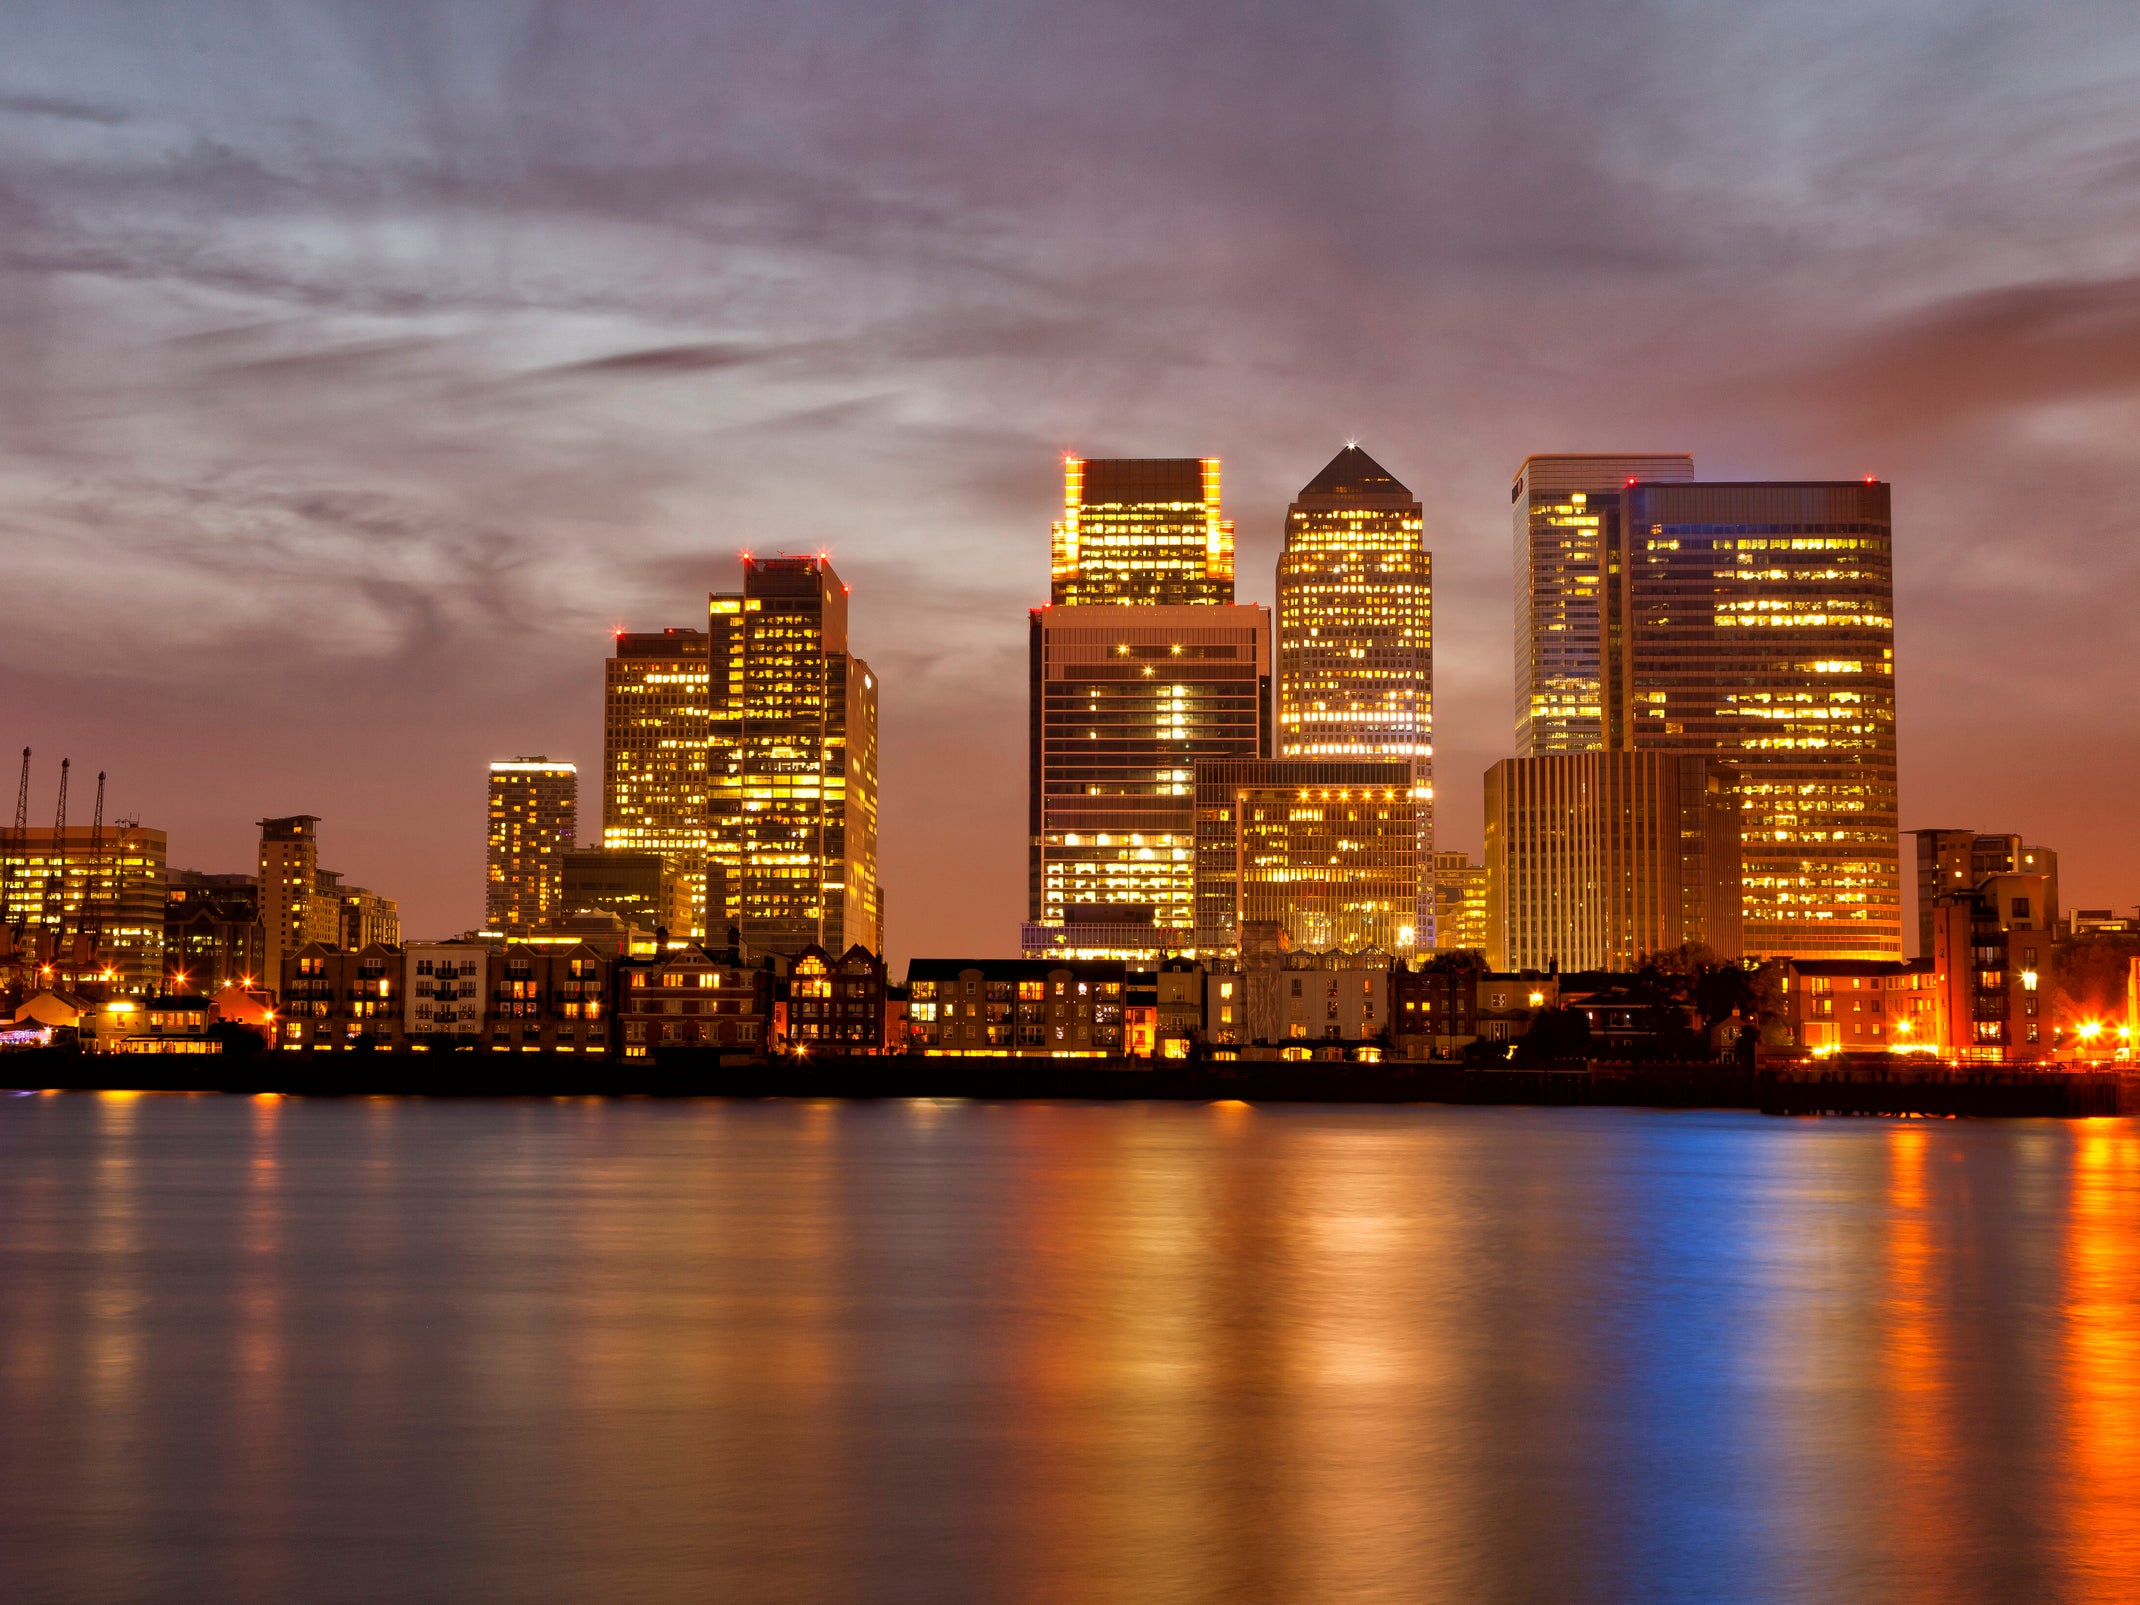 Canary Wharf in London, where a number of multinational corporations have offices